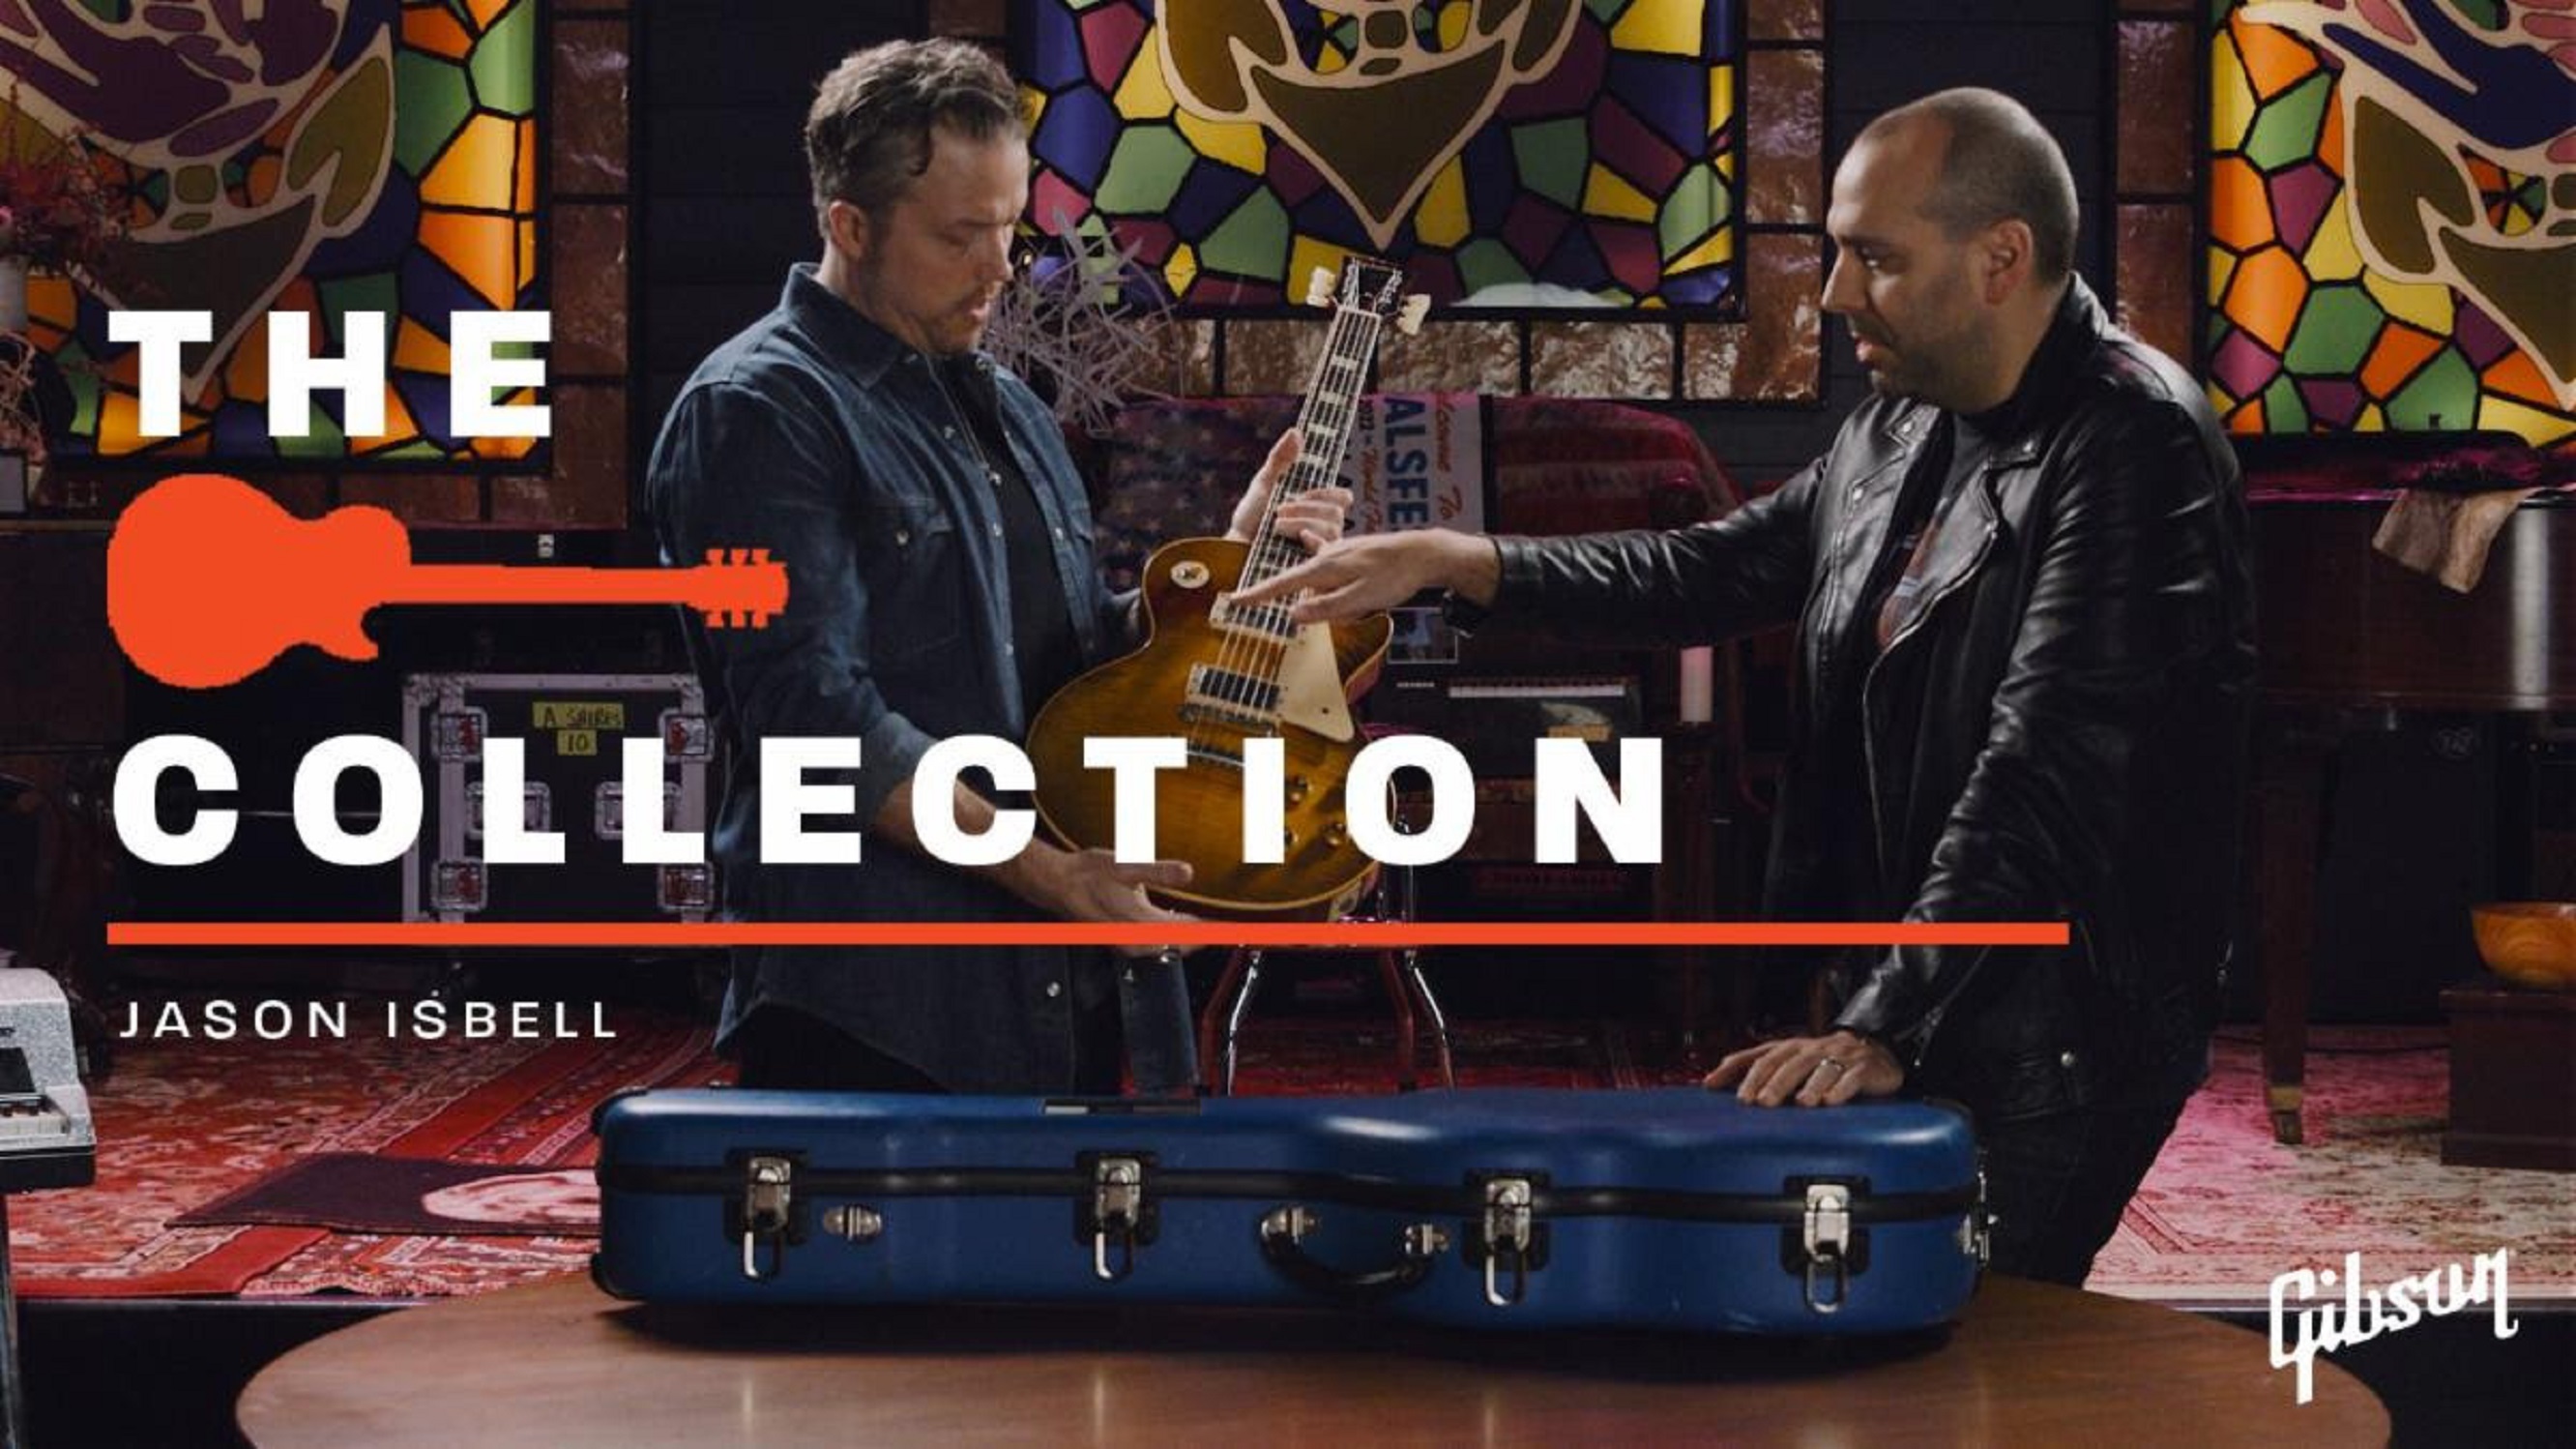 Jason Isbell: 4X GRAMMY Award Winner, and Acclaimed Singer-Songwriter Featured on New Episode of ‘The Collection,’ Streaming Now on Gibson TV